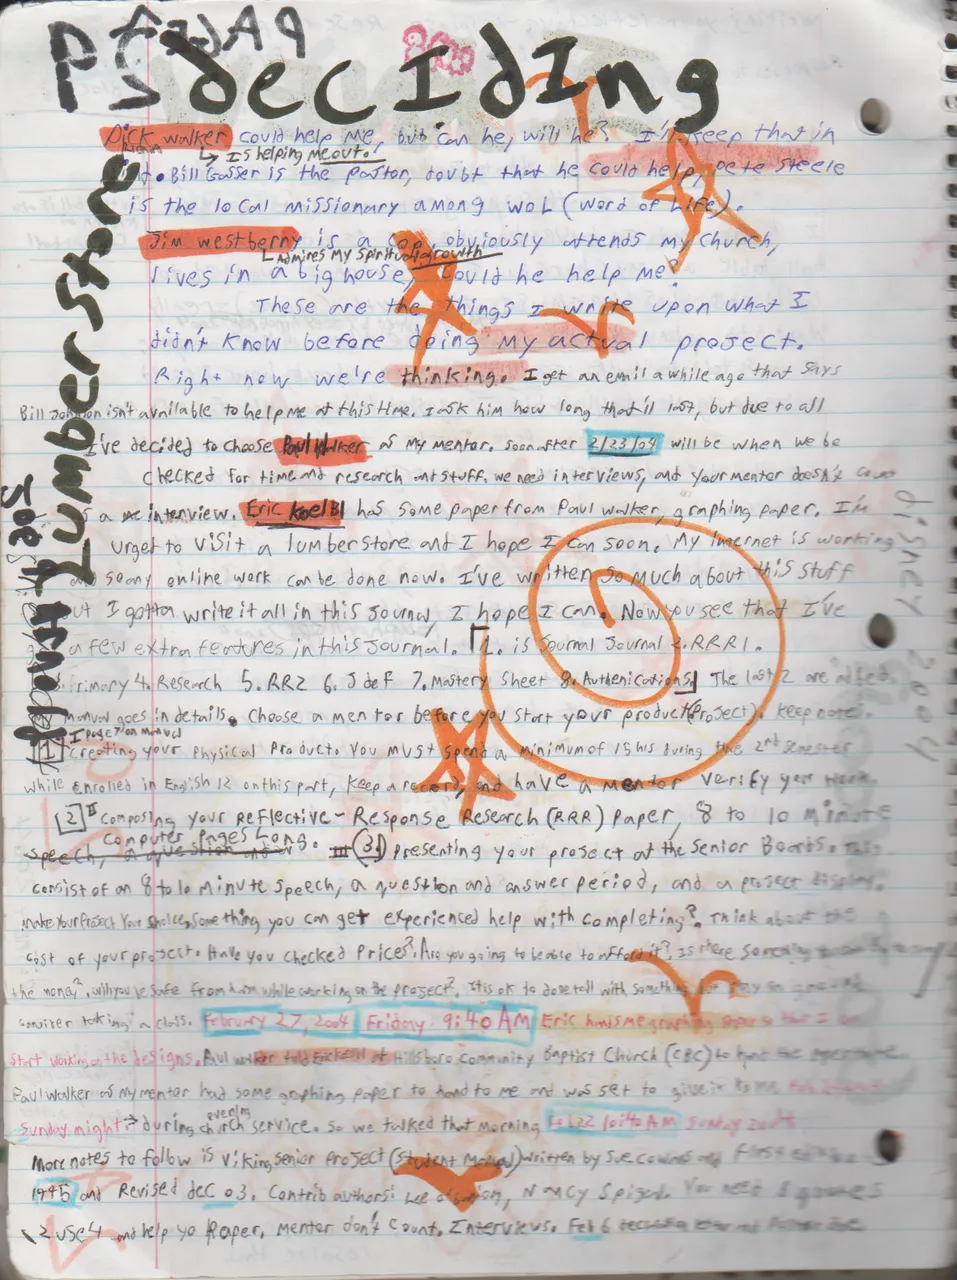 2004-01-29 - Thursday - Carpetball FGHS Senior Project Journal, Joey Arnold, Part 02, 96pages numbered, Notebook-25.png